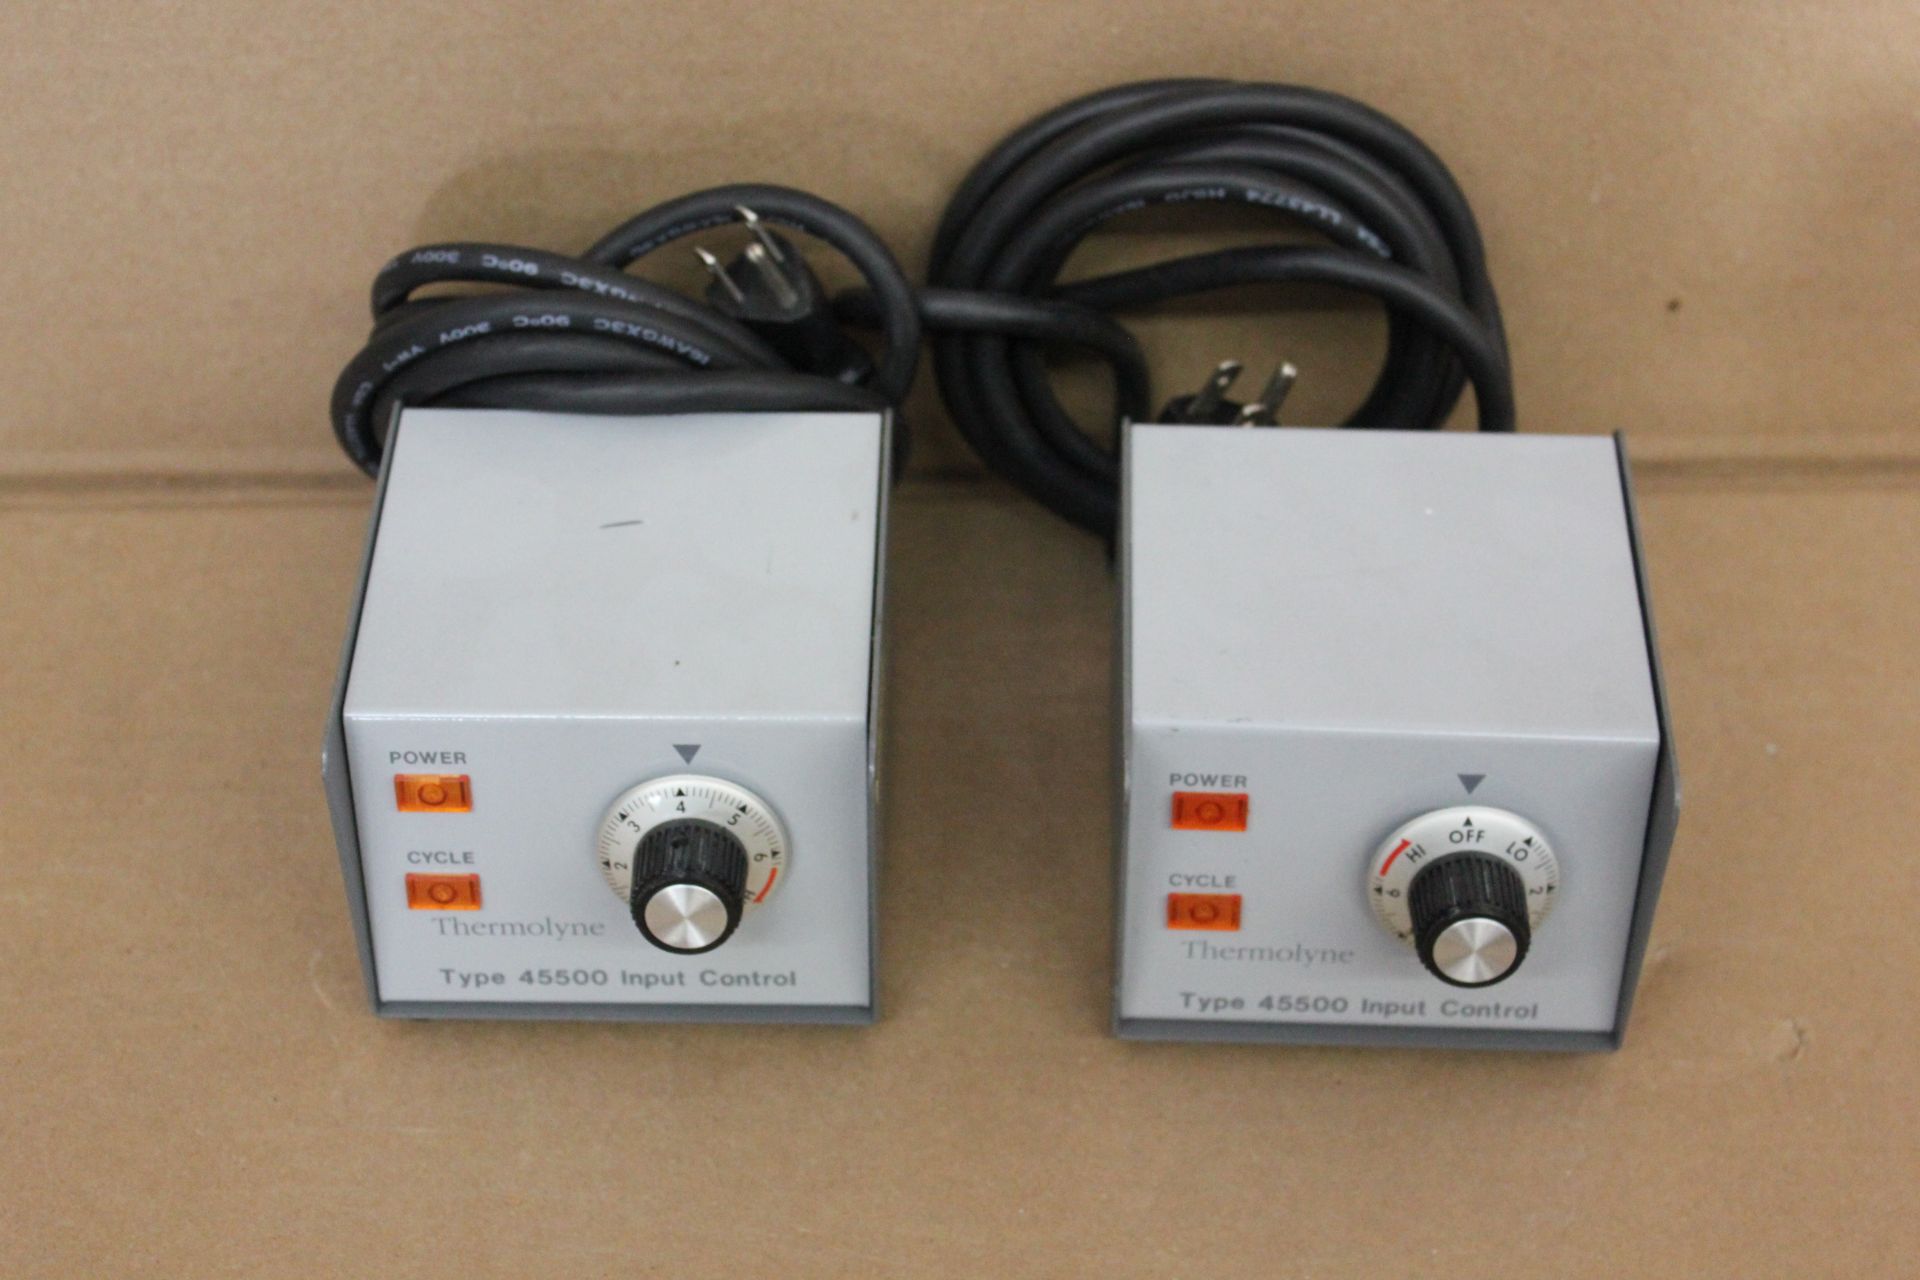 LOT OF 2 THERMOLYNE 45500 INPUT CONTROLLERS